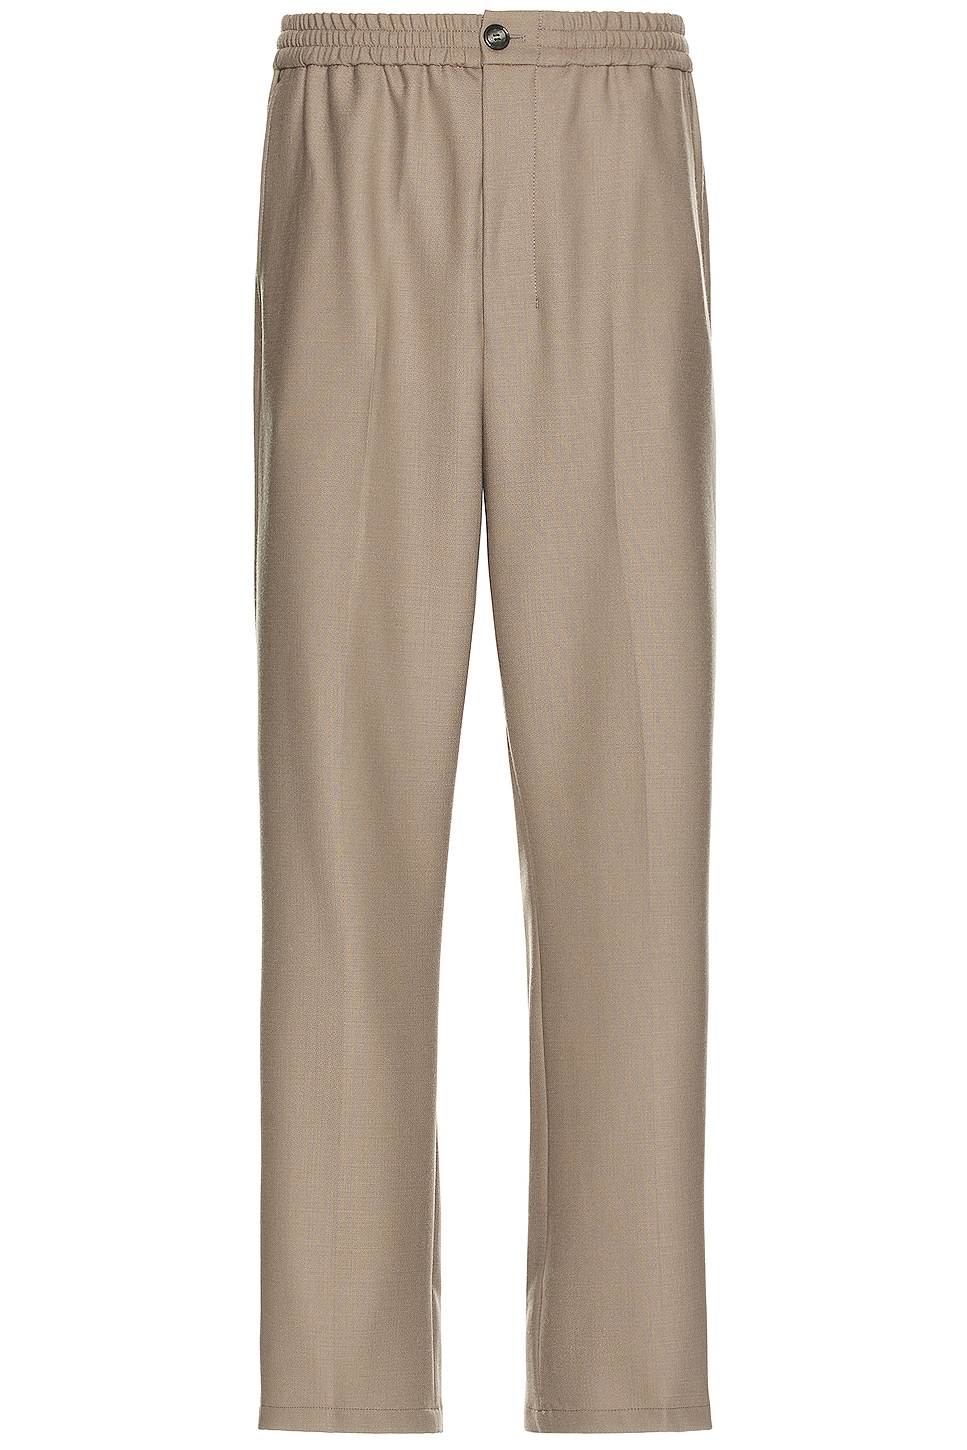 Image 1 of ami Elasticated Trousers in Taupe